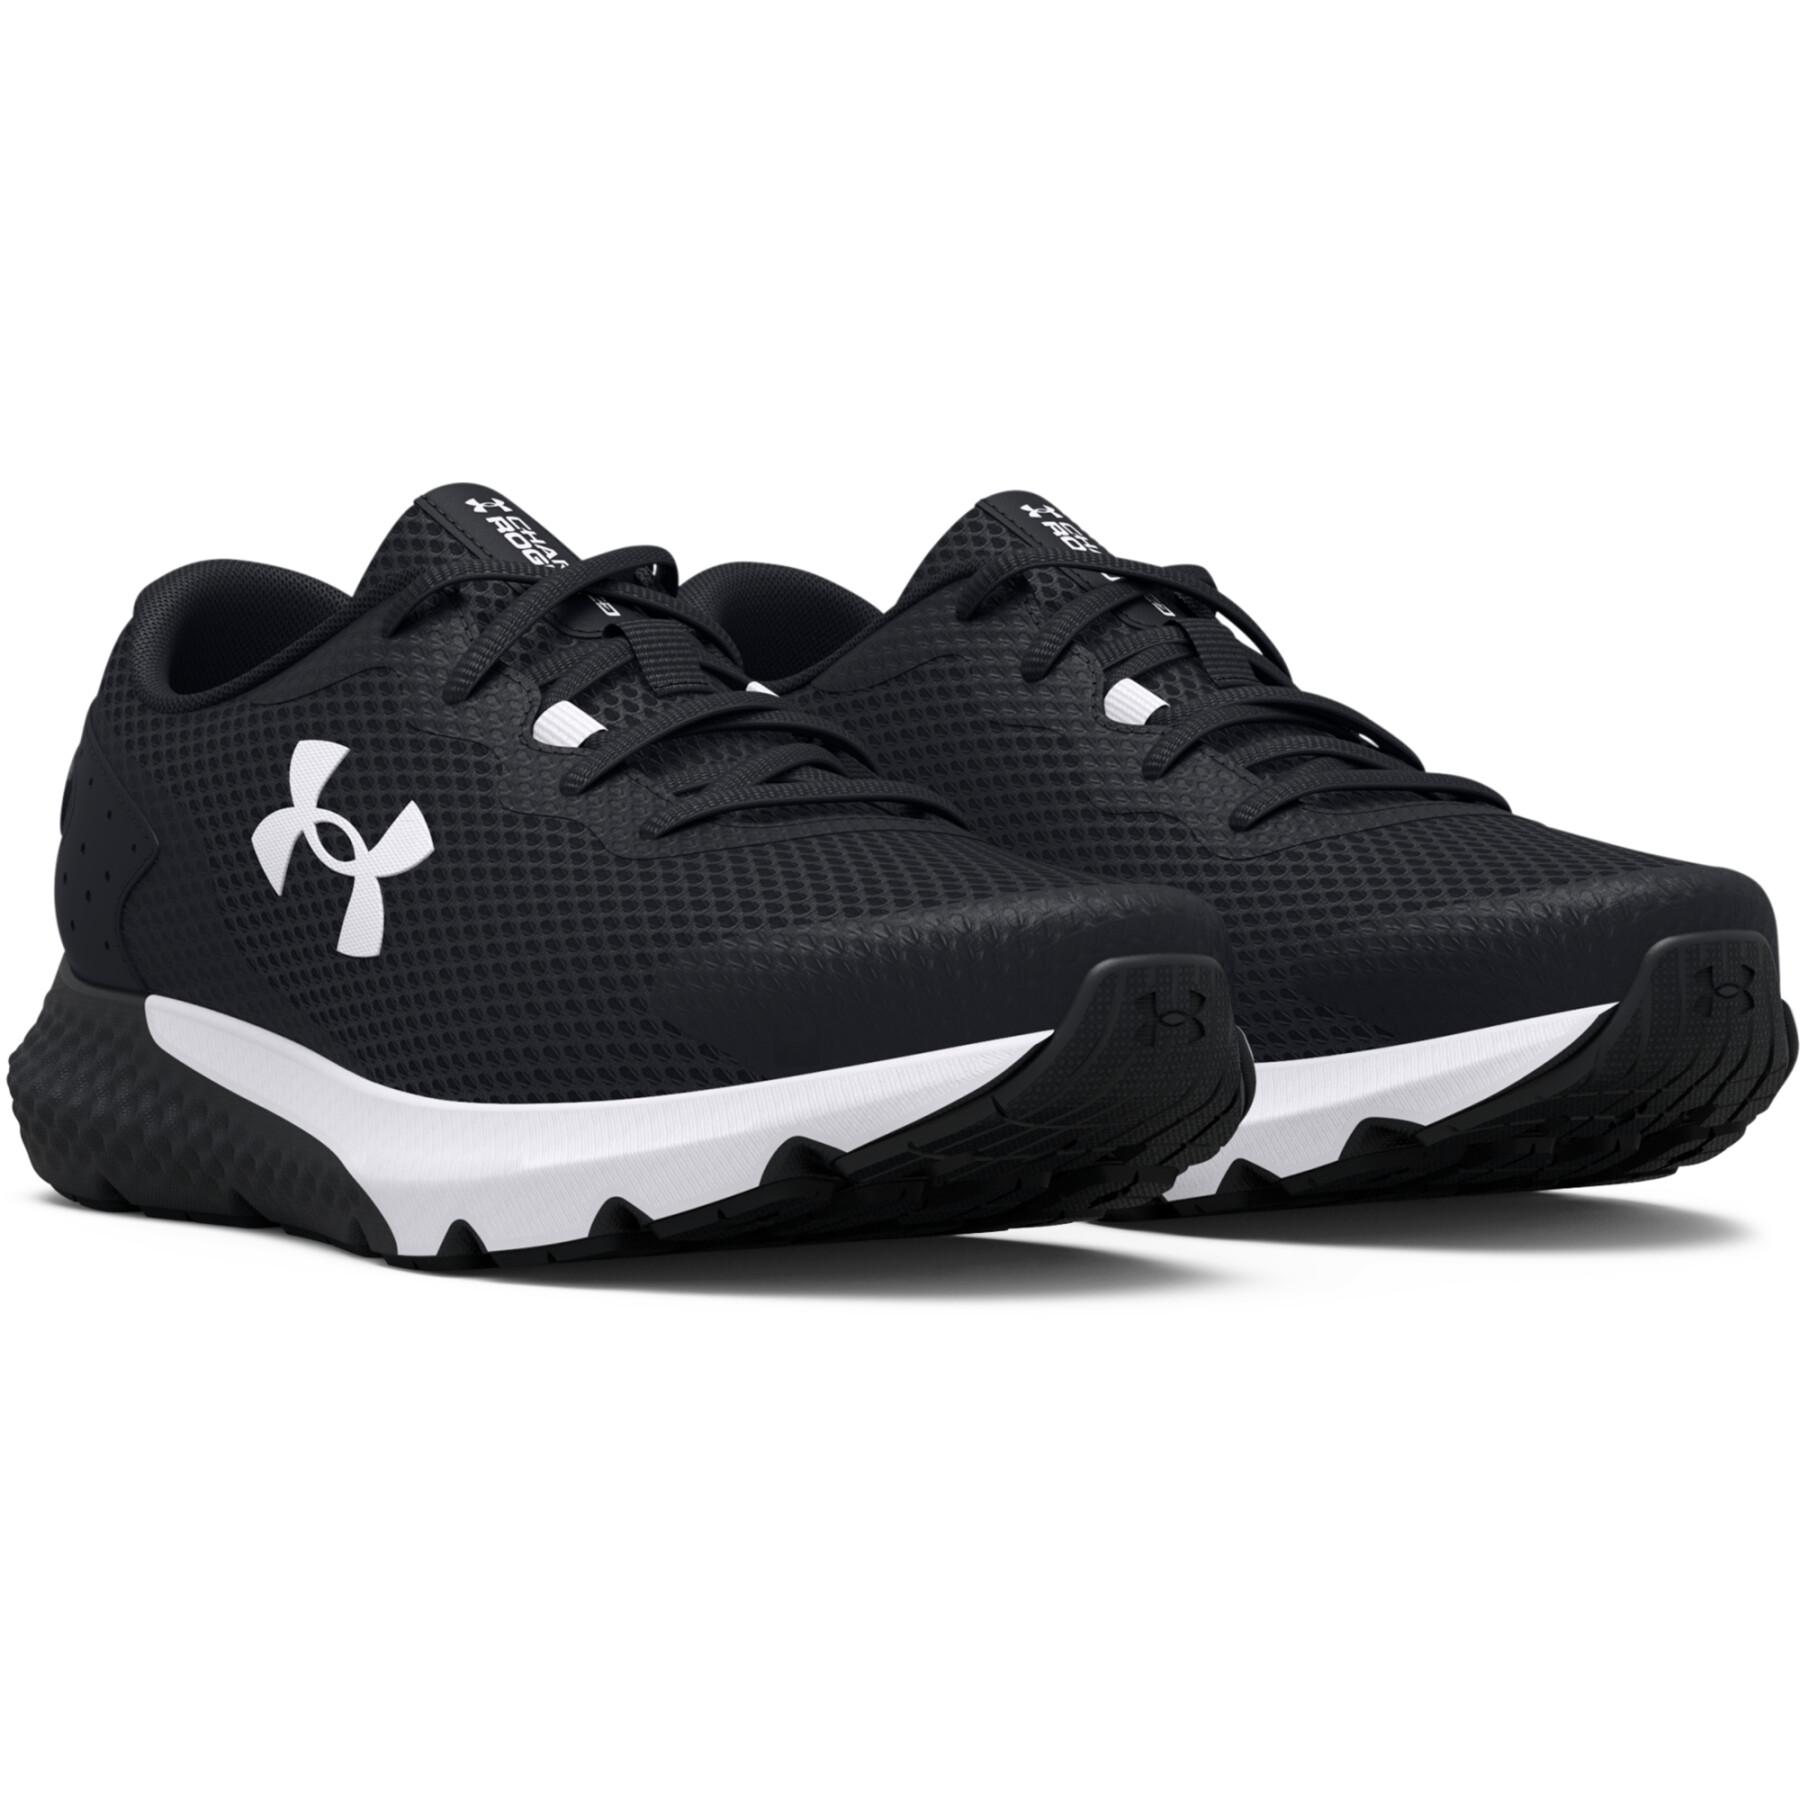 Running shoes enfant Under Armour Charged Rogue 3